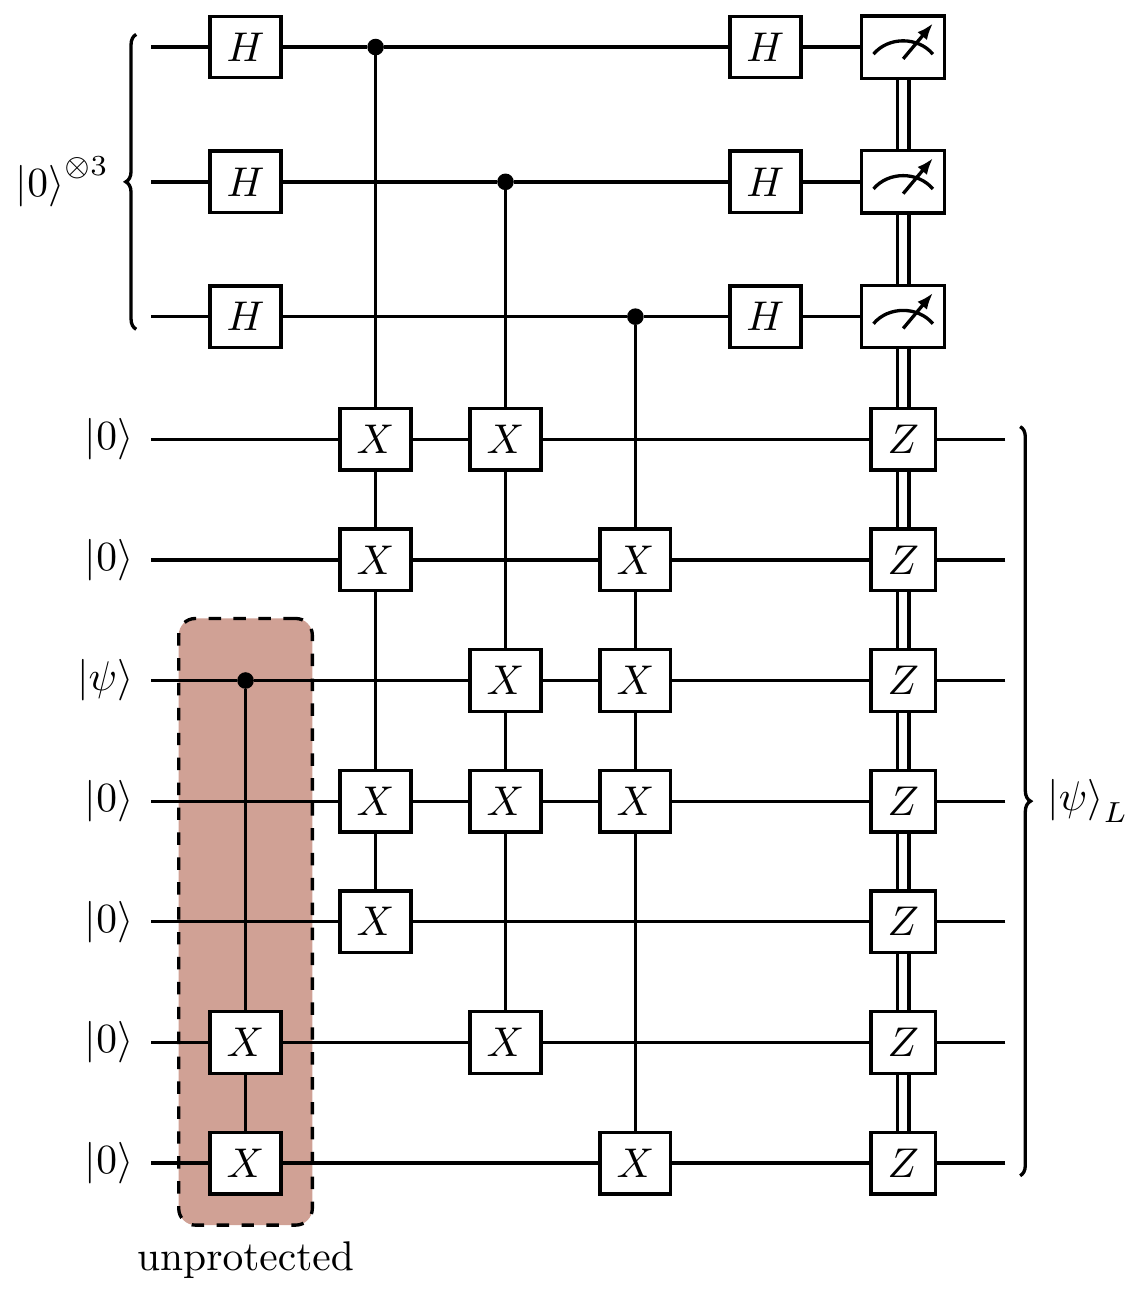 Preparing the logical version |\psi\rangle_L of an arbitrary state |\psi\rangle in a way that allows us to correct for any single-qubit errors in the encoding process, but not the preparation process (highlighted in red).